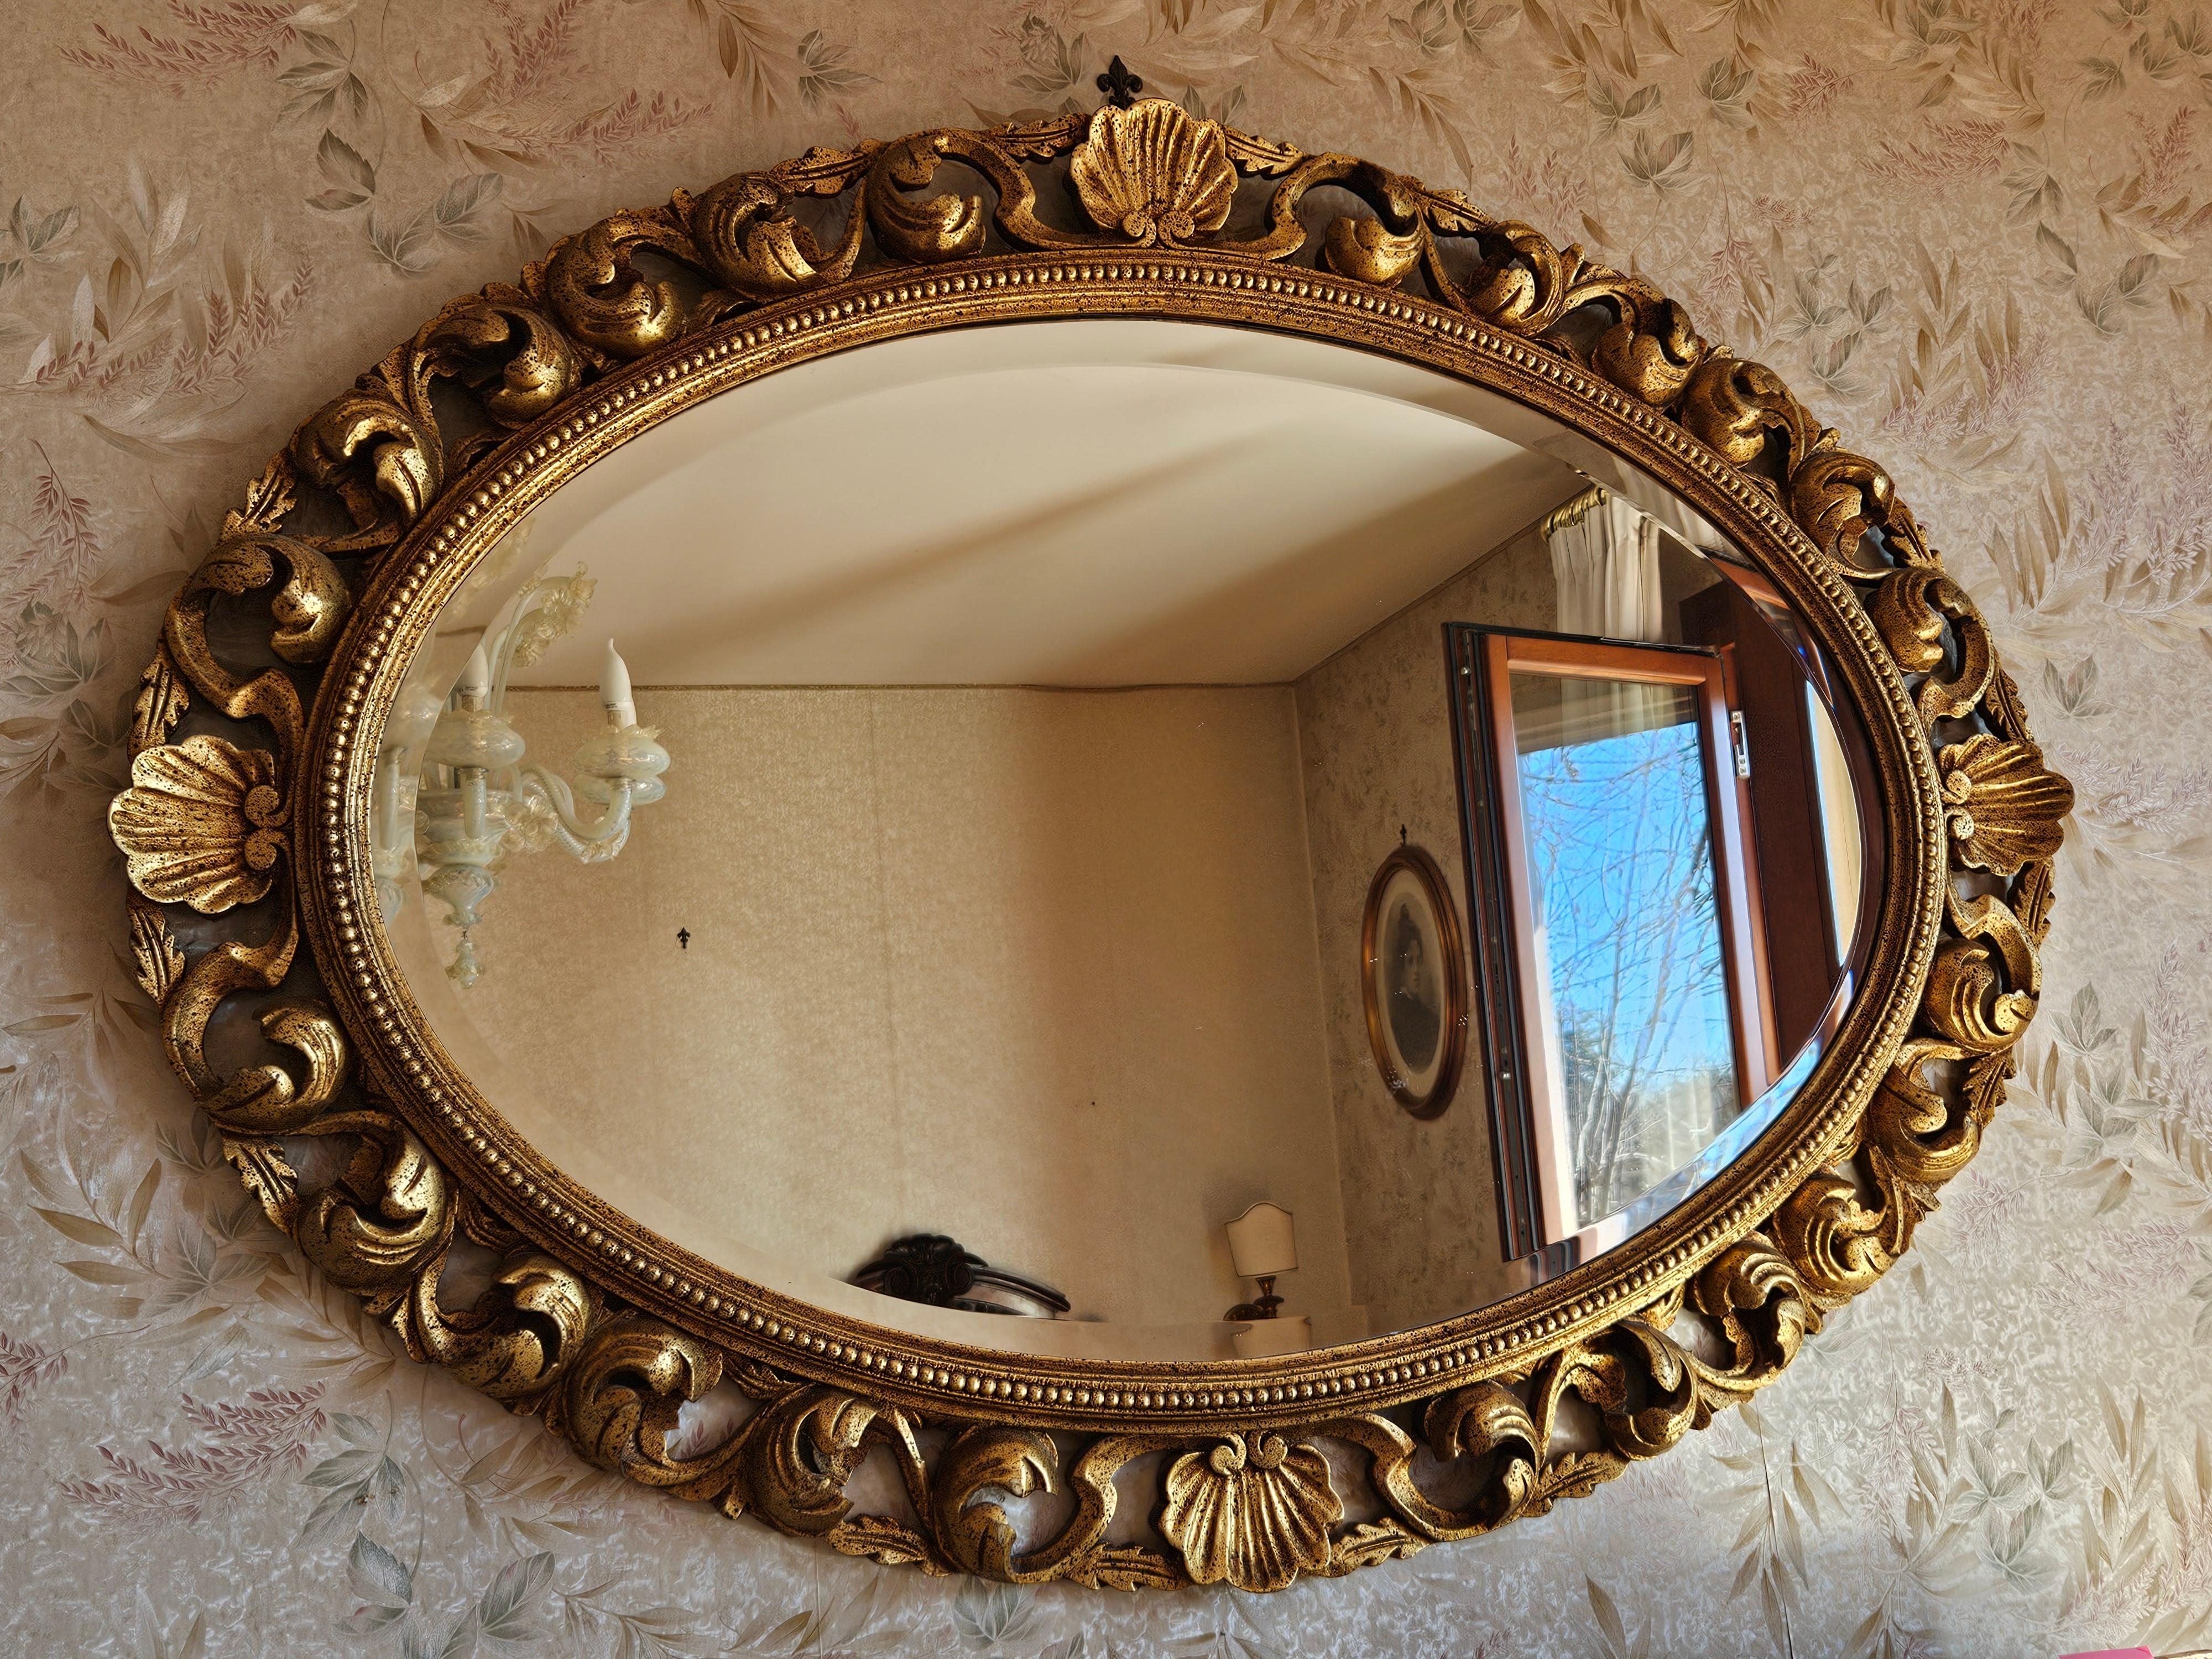 Large gilt wood mirror for bedroom or living room, perfect for all types of rooms.

Very elegant and refined.

Normal signs of wear due to age and use.
